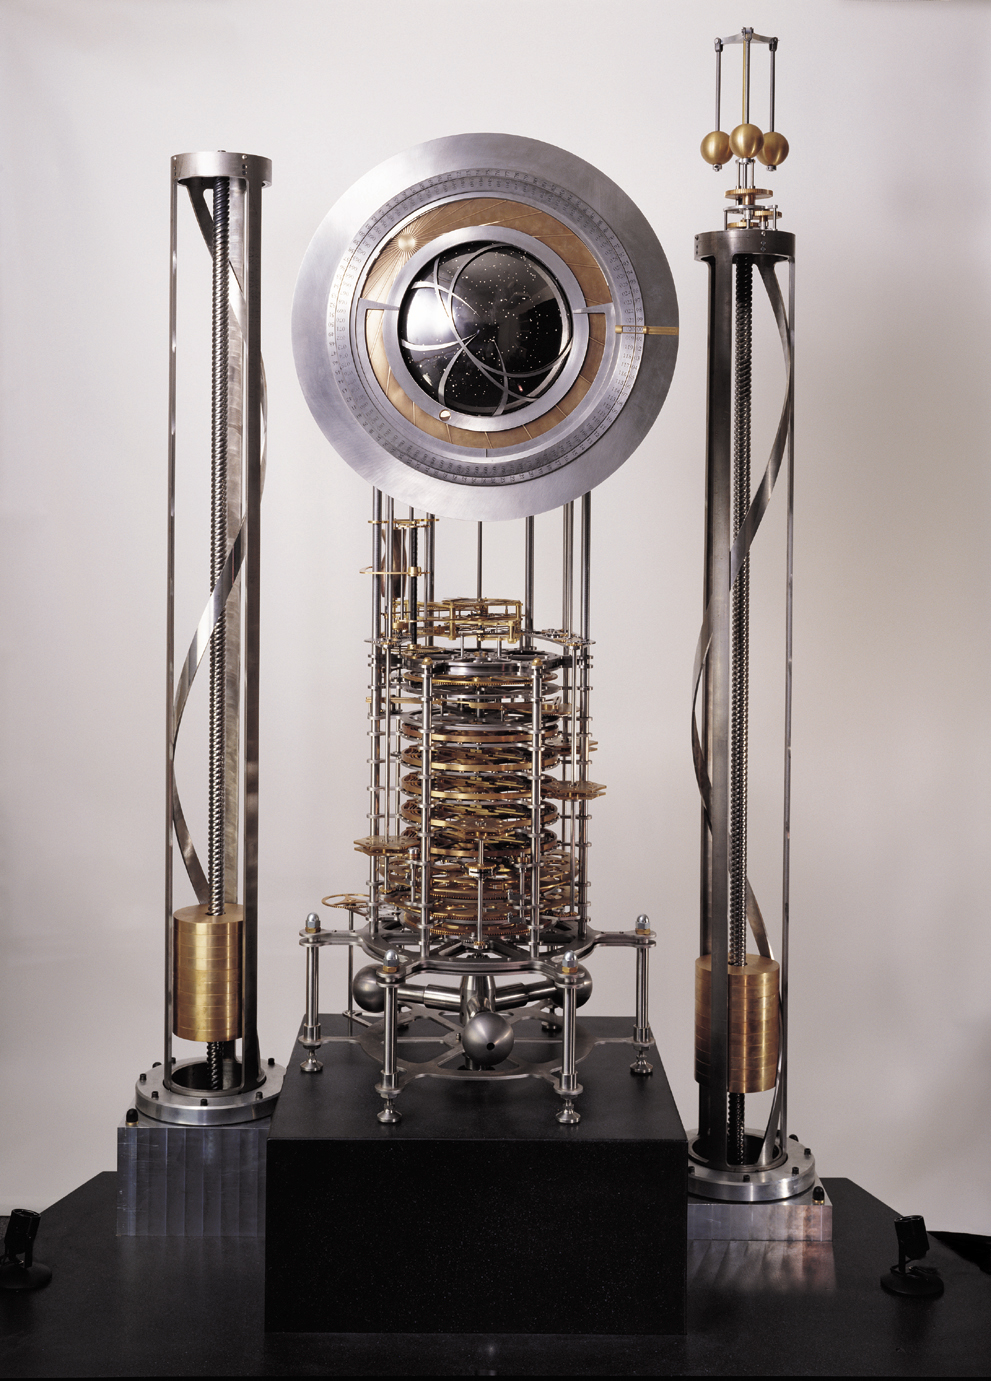 Prototype Clock of the Long Now, By Rolfe Horn, courtesy of the Long Now Foundation